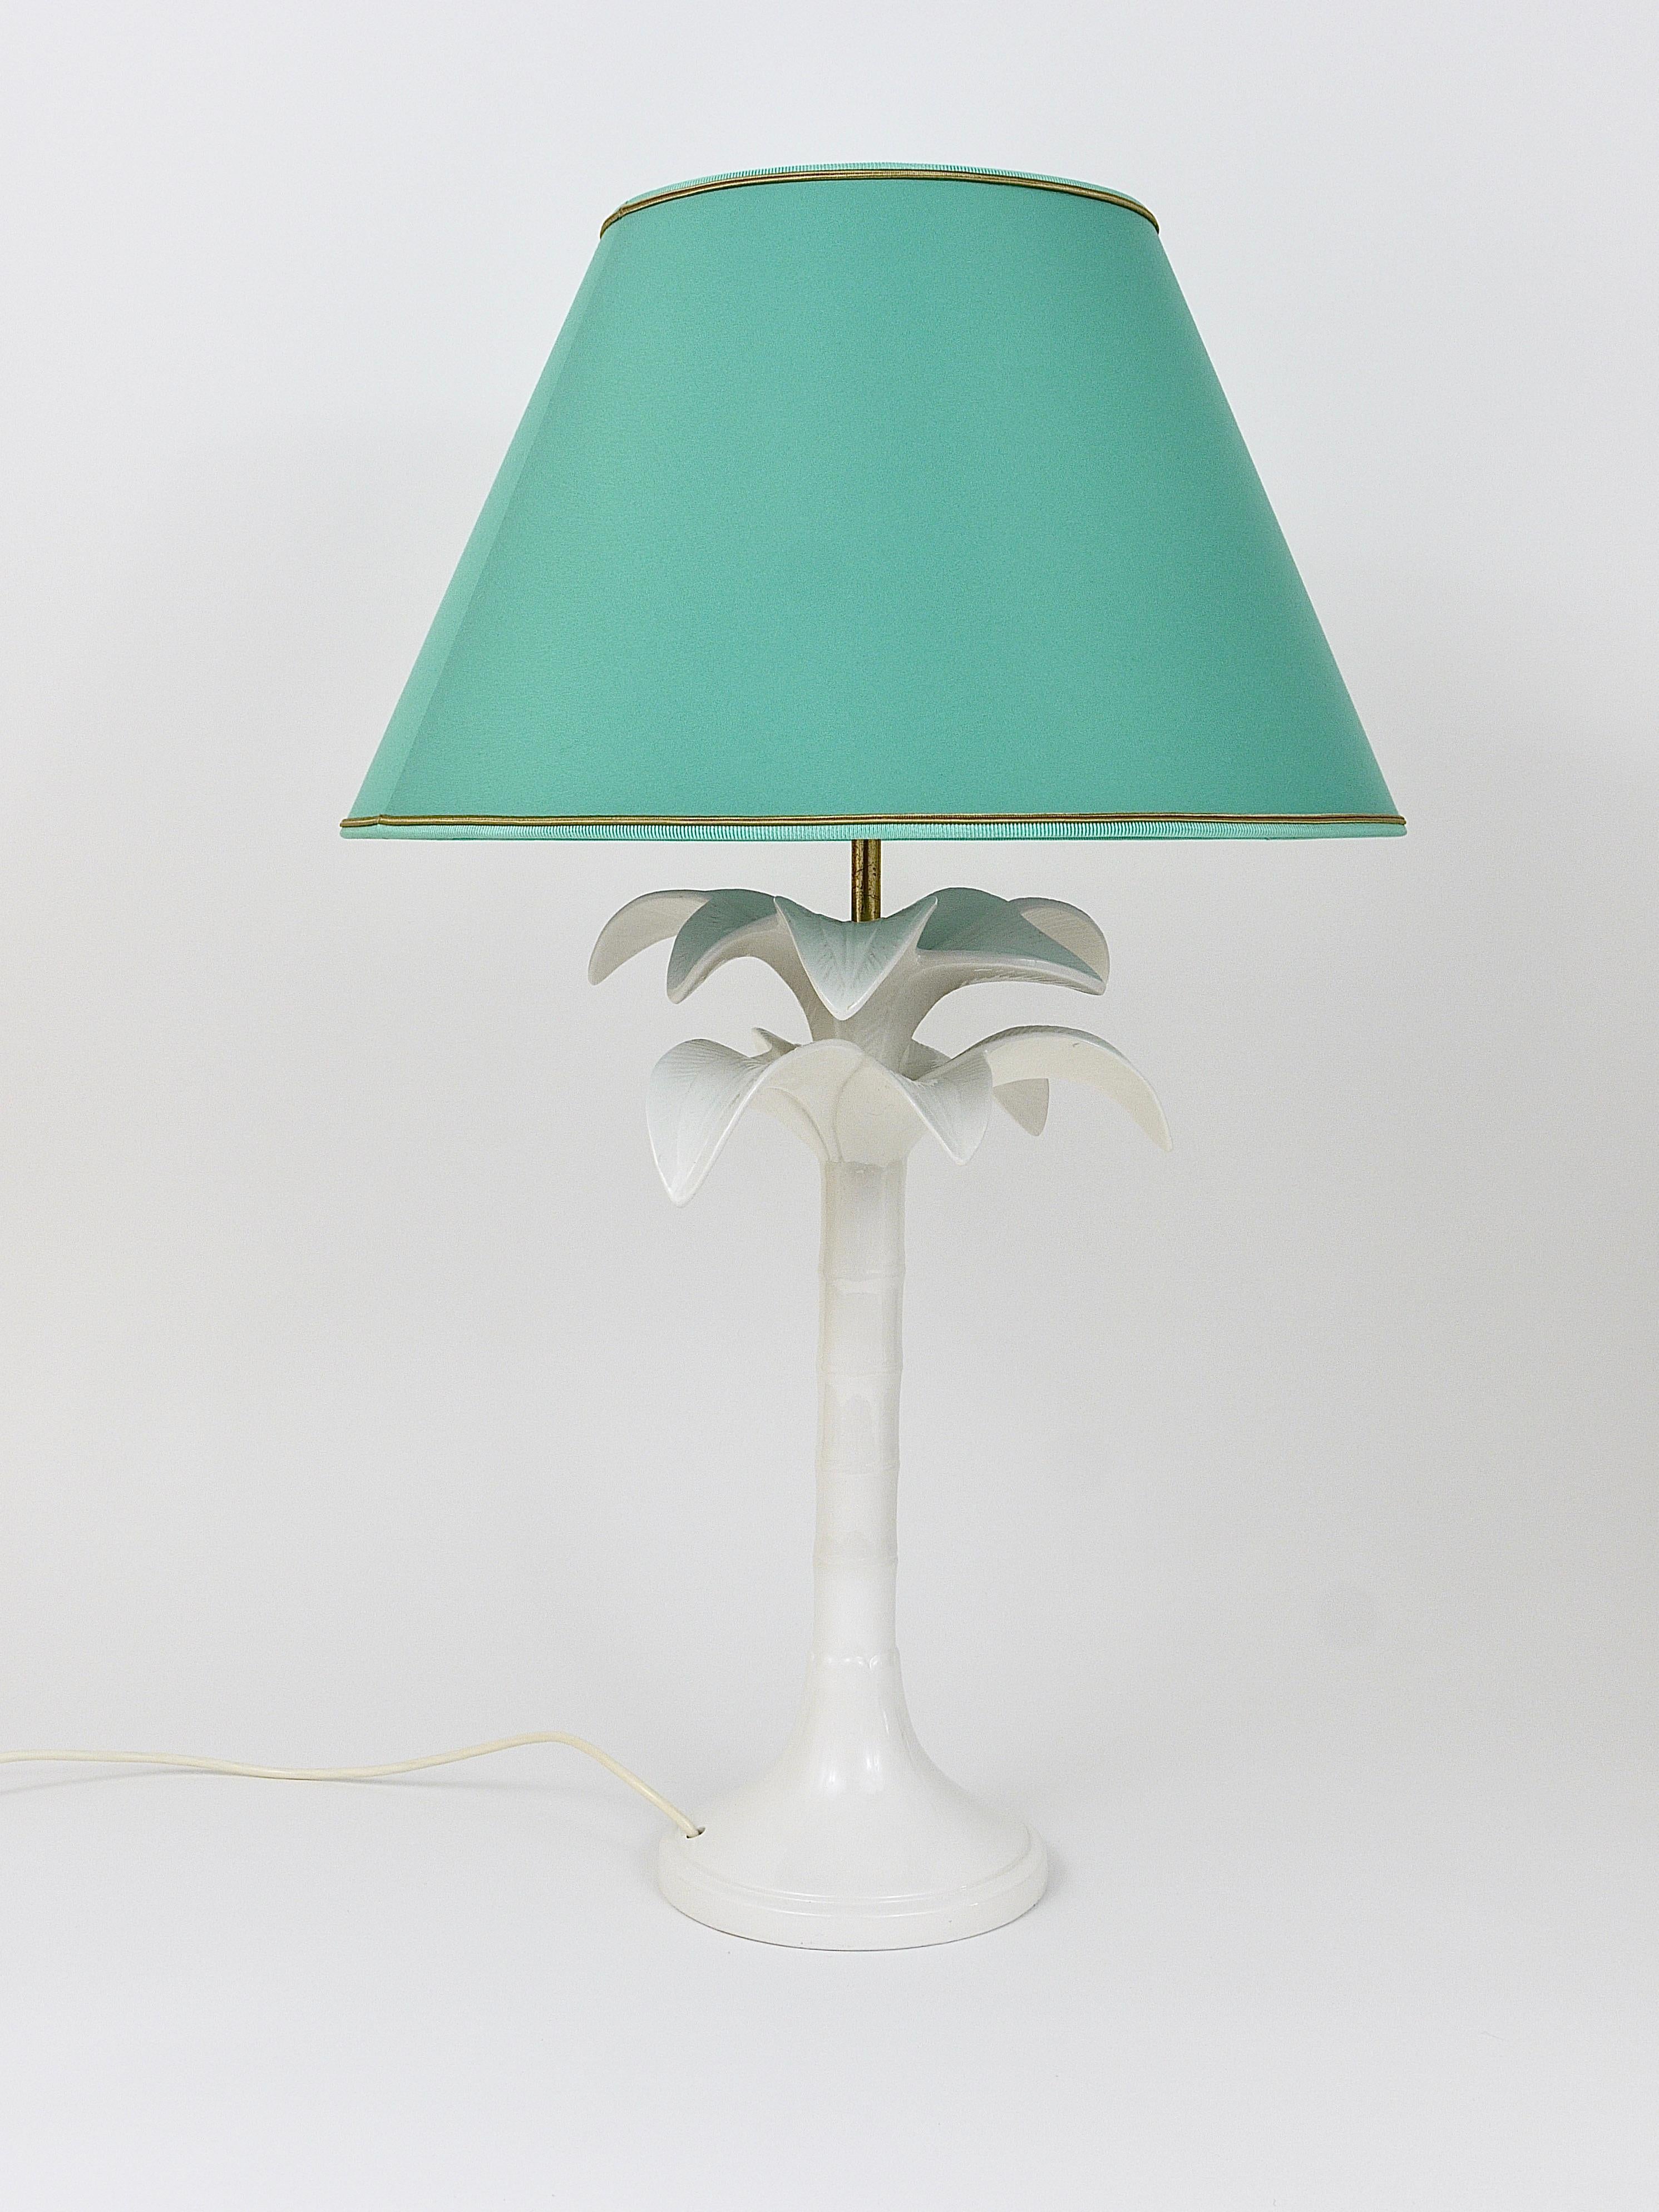 Metal Tommaso Barbi White Palm Tree Faux Bamboo Table Lamp, Italy, 1970s For Sale